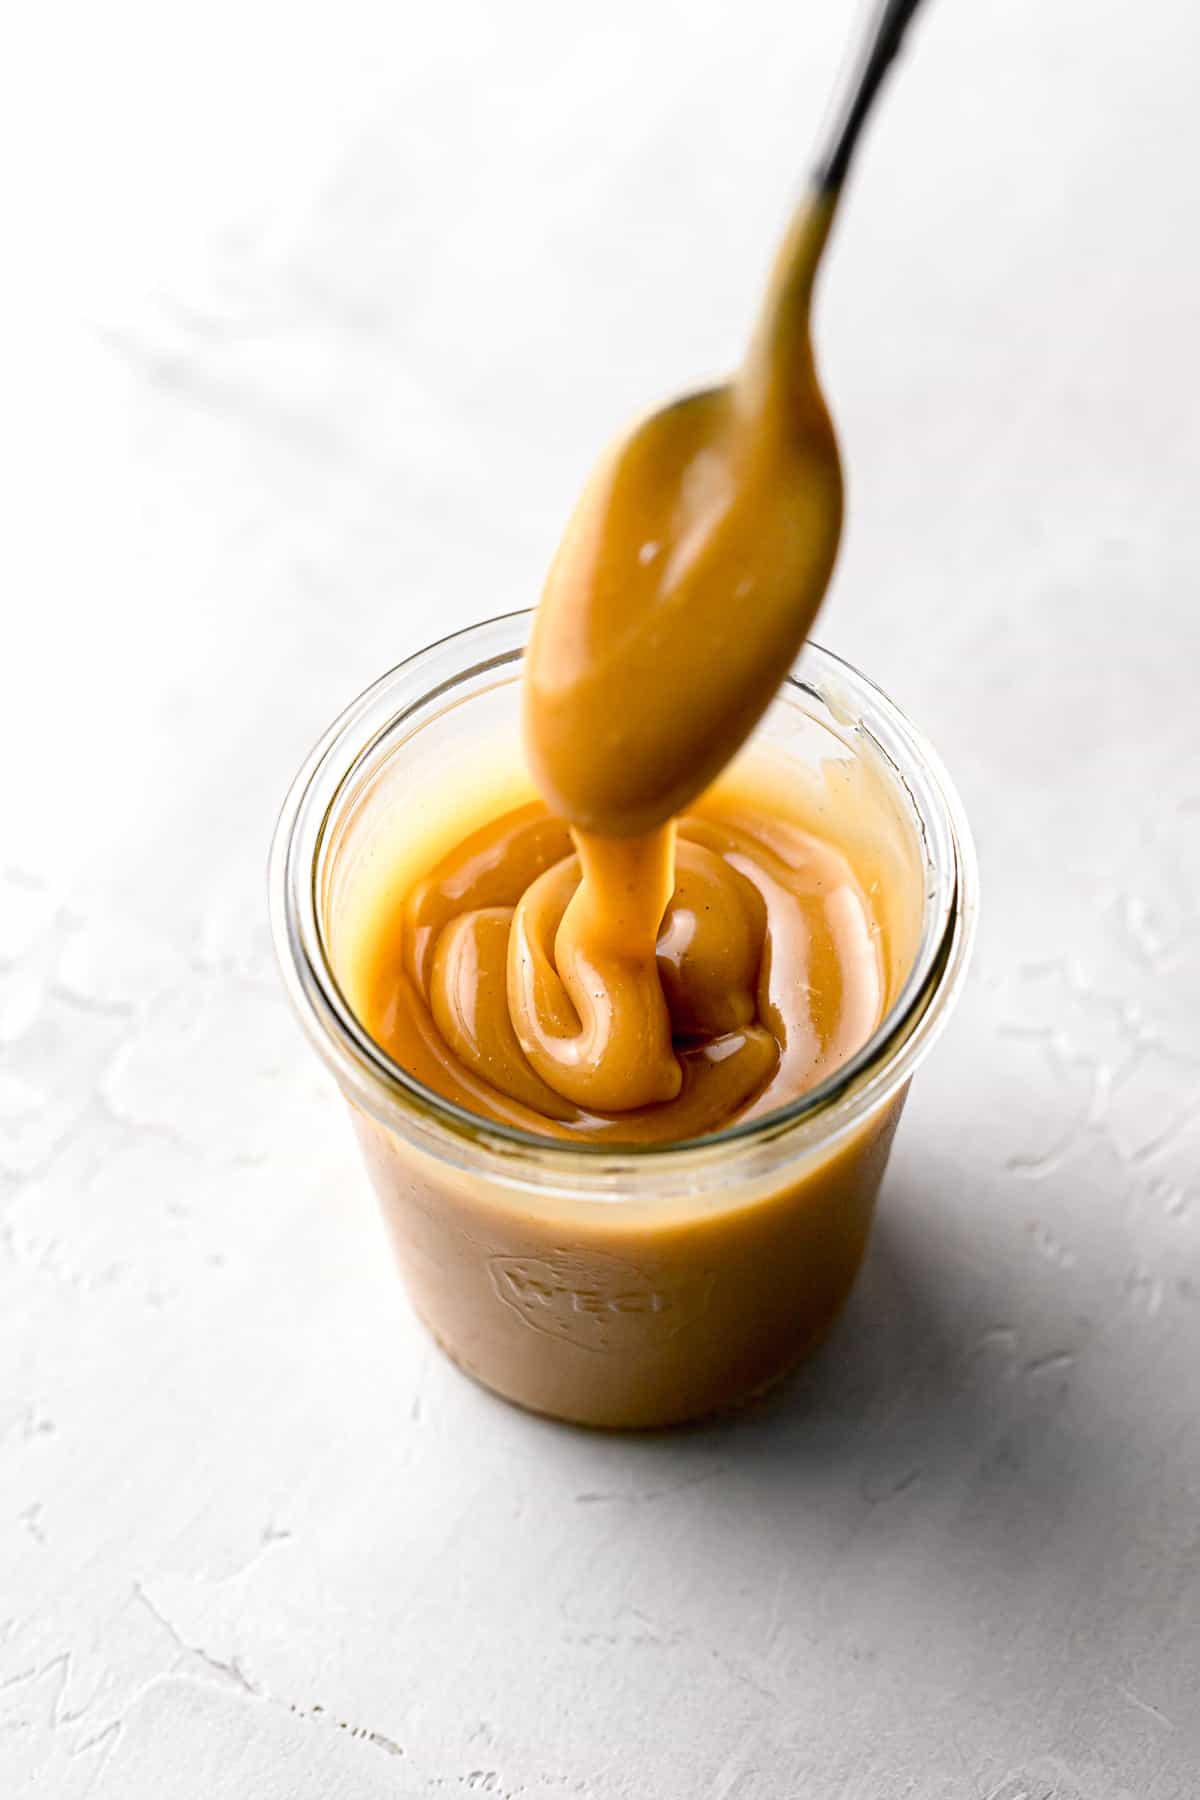 salted caramel sauce in glass jar with spoon.